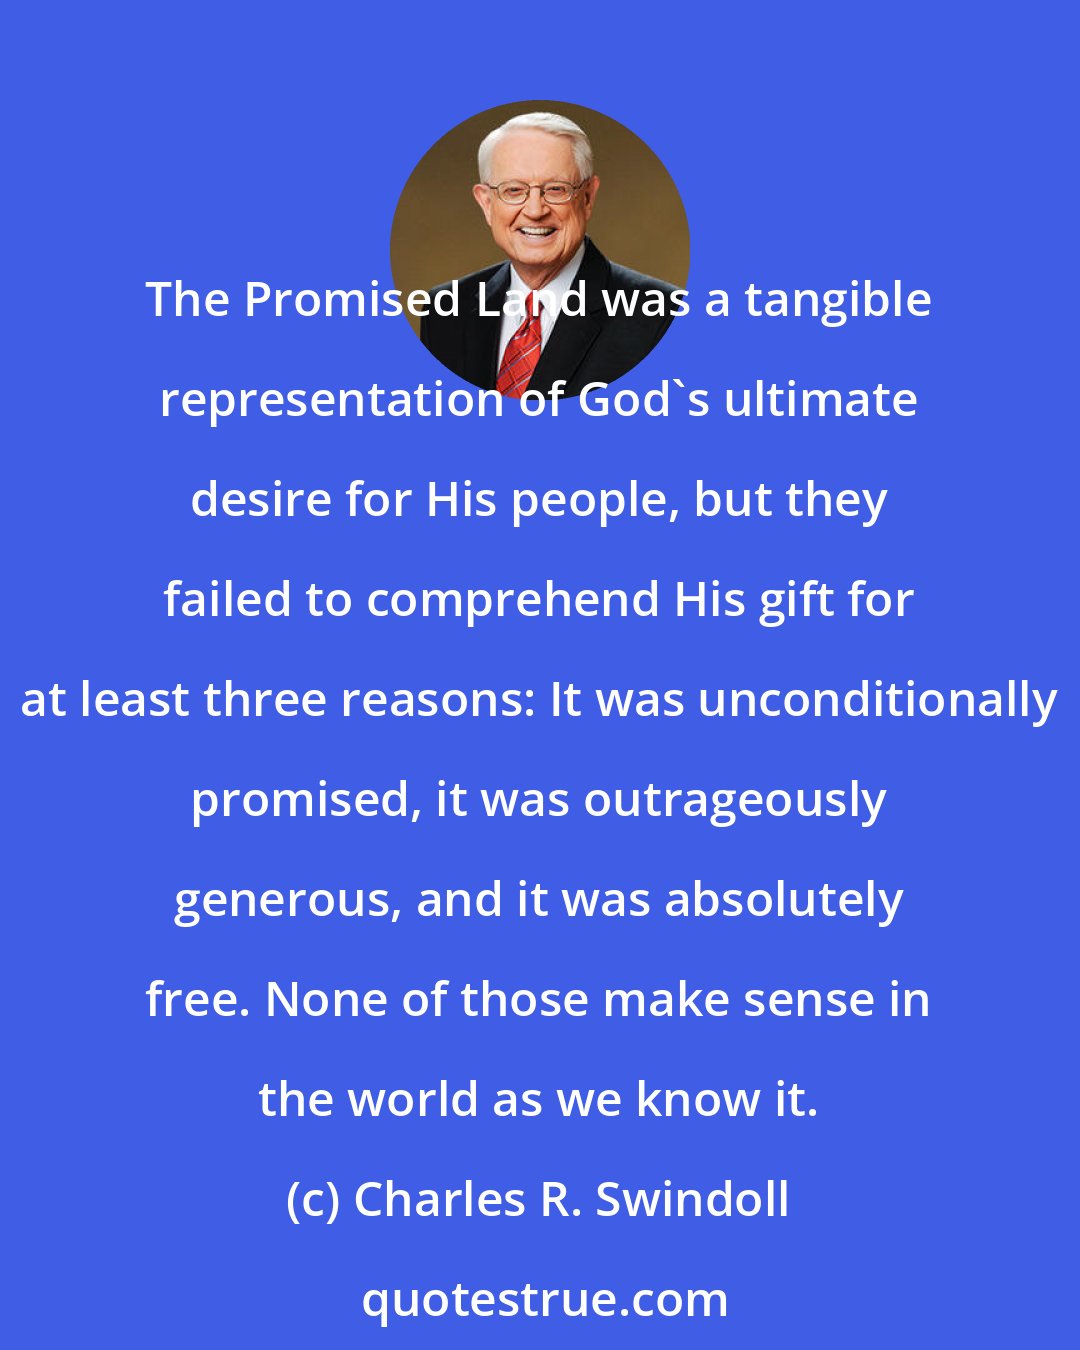 Charles R. Swindoll: The Promised Land was a tangible representation of God's ultimate desire for His people, but they failed to comprehend His gift for at least three reasons: It was unconditionally promised, it was outrageously generous, and it was absolutely free. None of those make sense in the world as we know it.